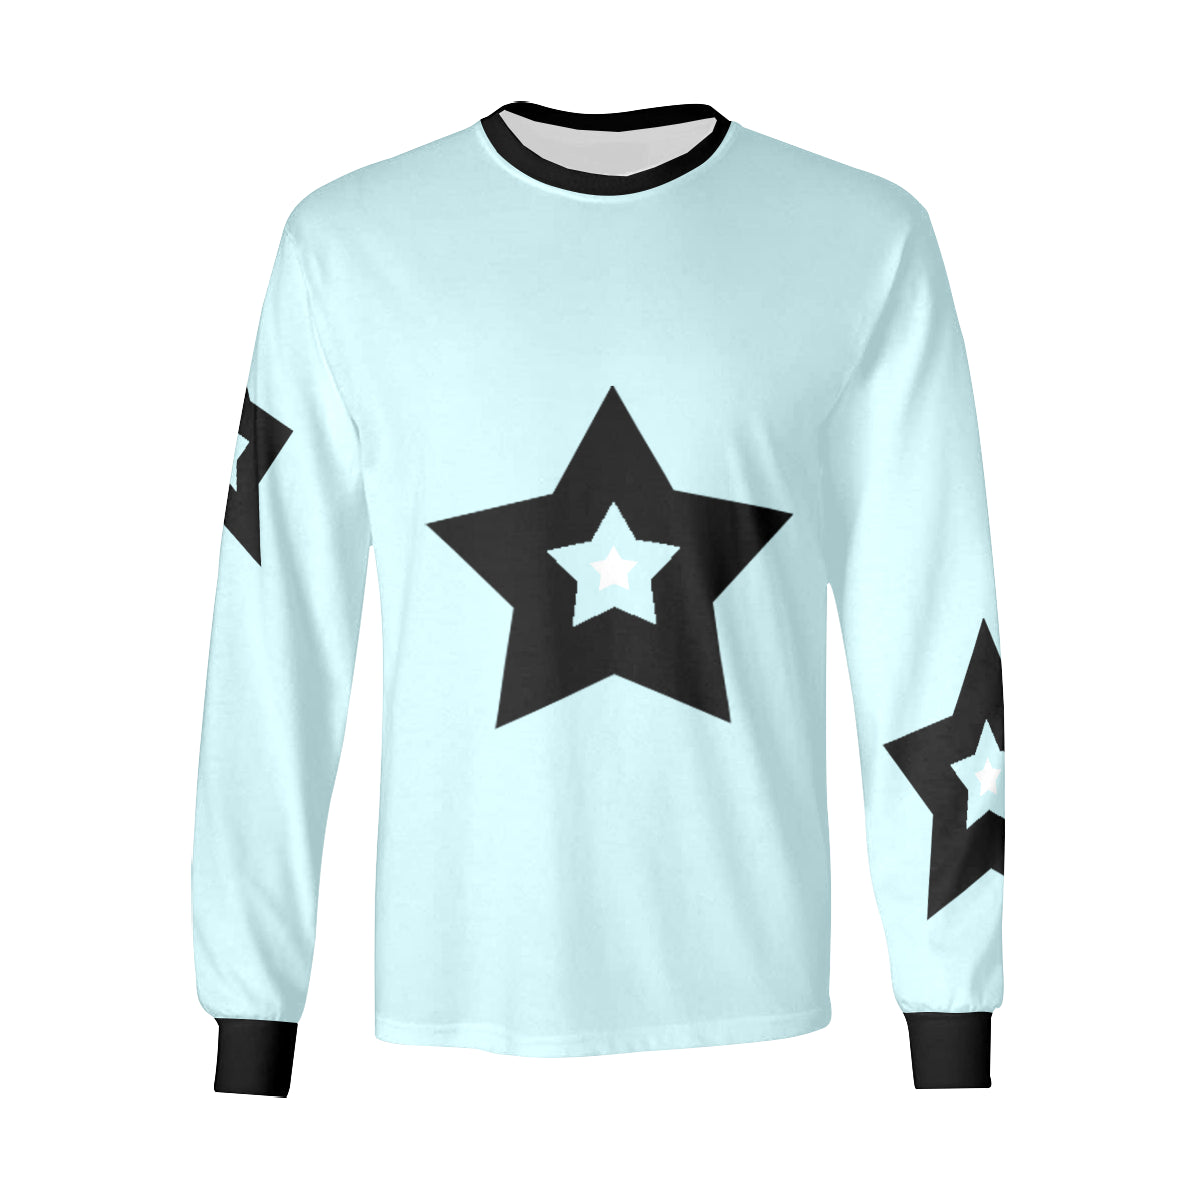 Bulky Stars. long sleeve T-shirt, Baby blue by Stardust